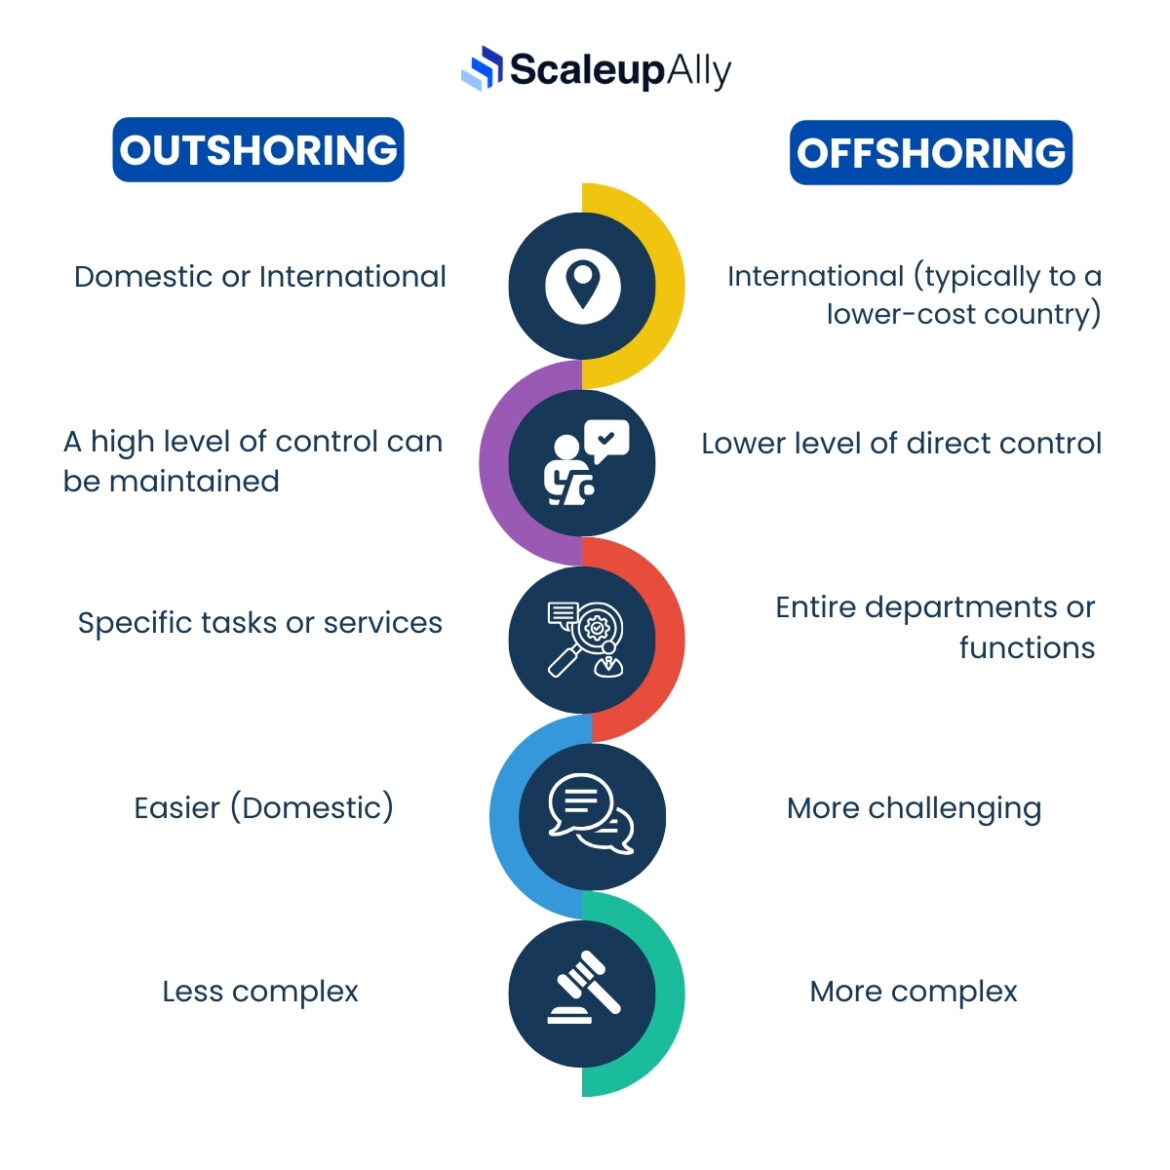 differences between outsourcing and offshoring